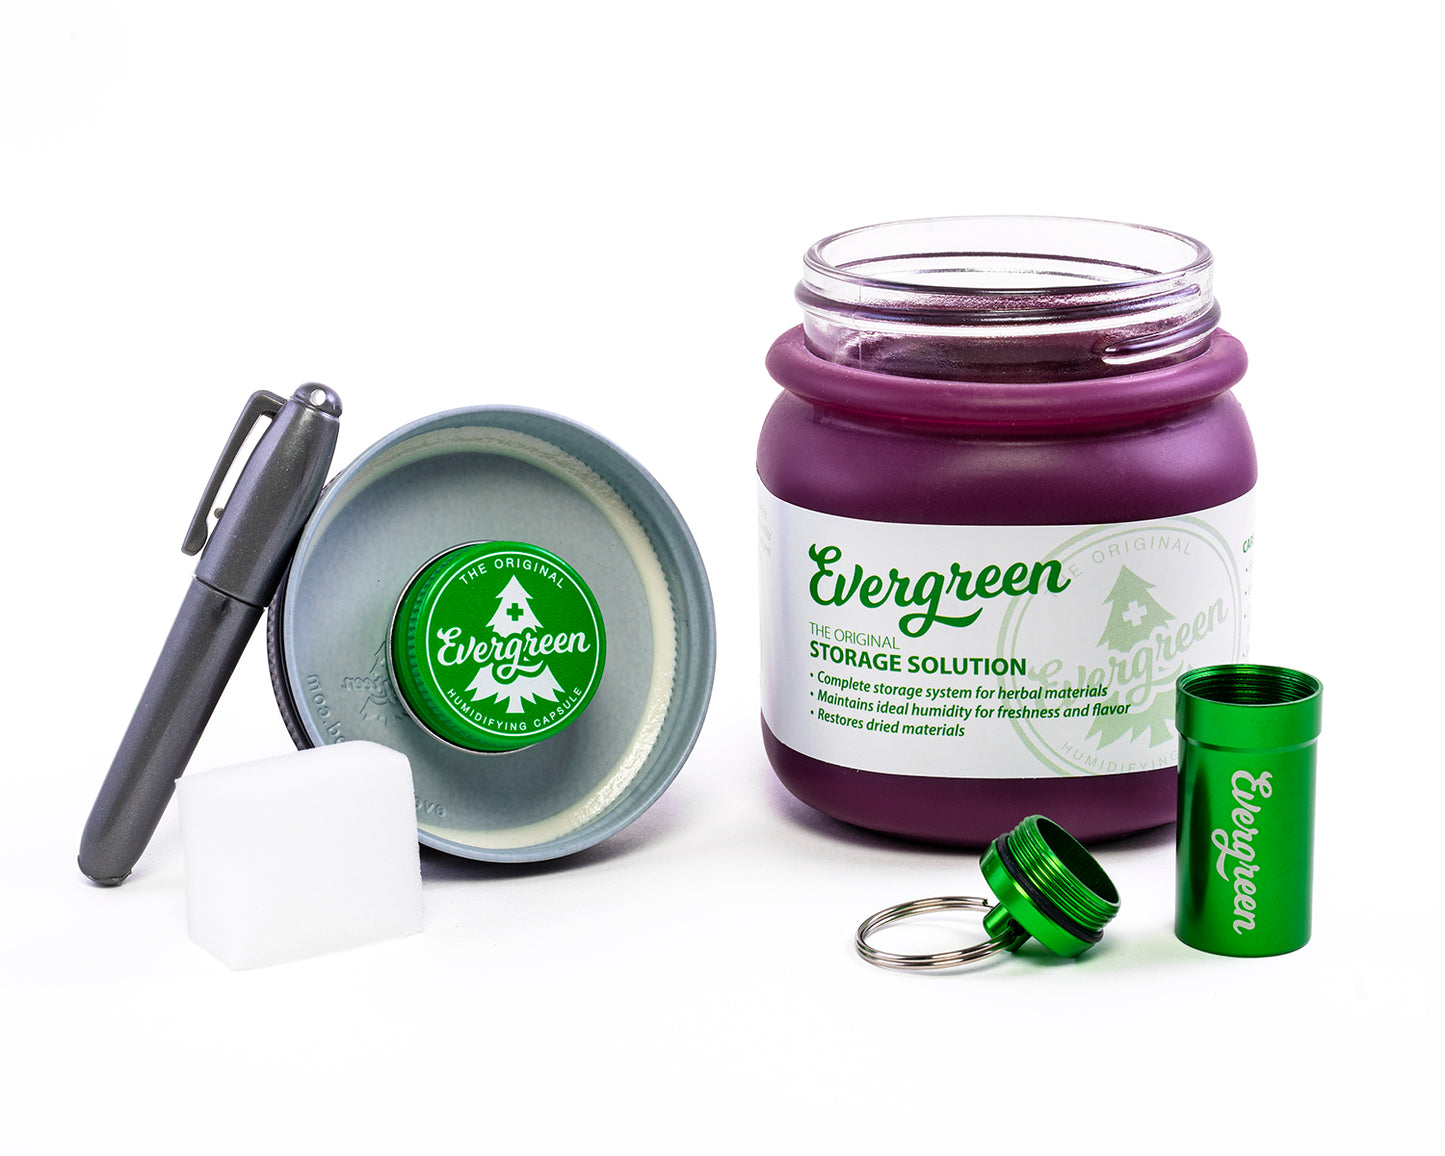 Evergreen Storage Solution open showing contents, purple